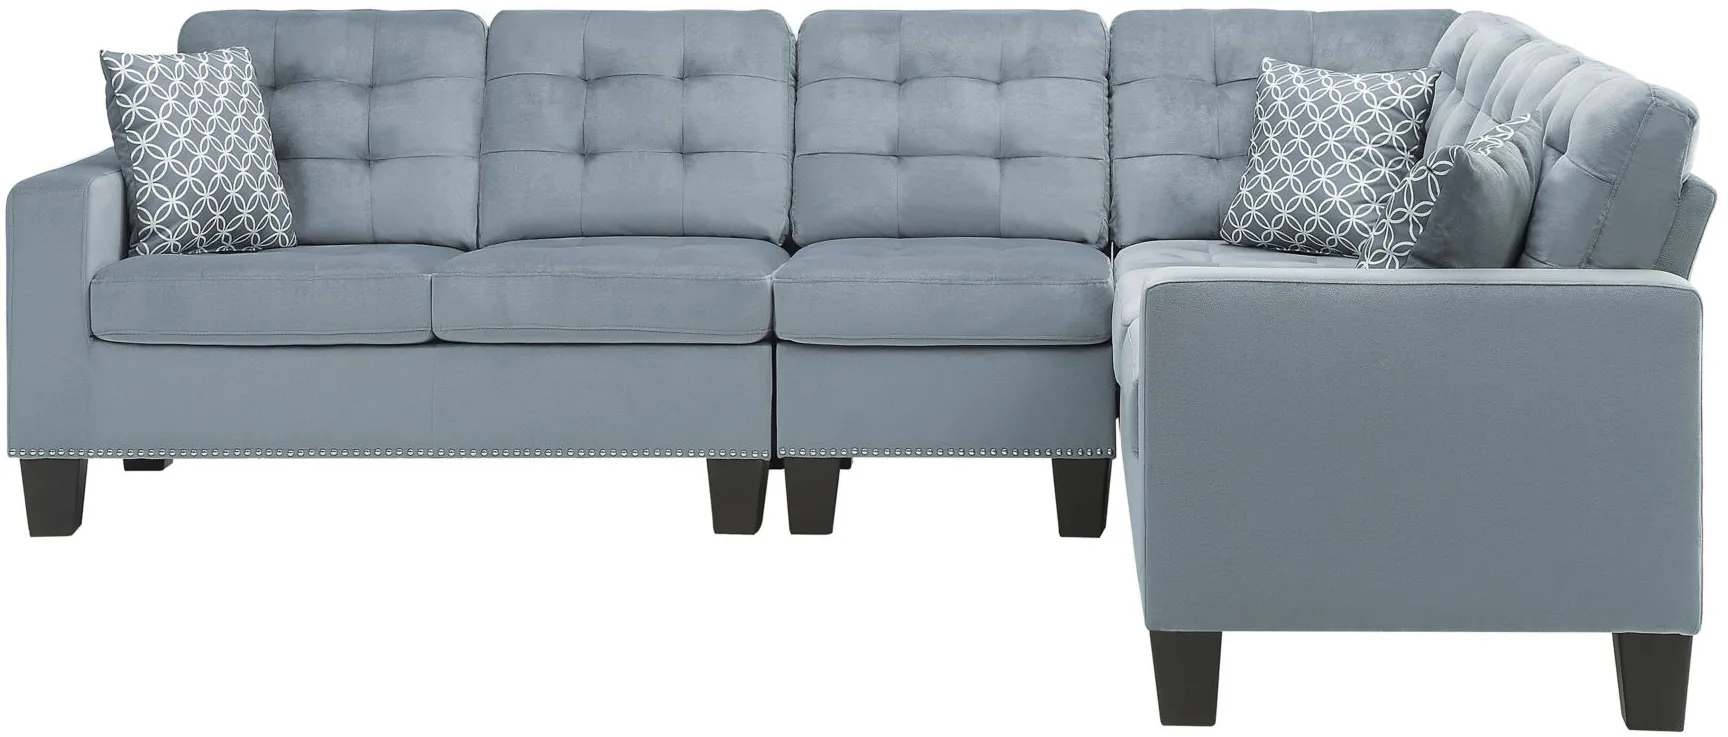 Delta 4-pc. Sectional in Gray by Homelegance